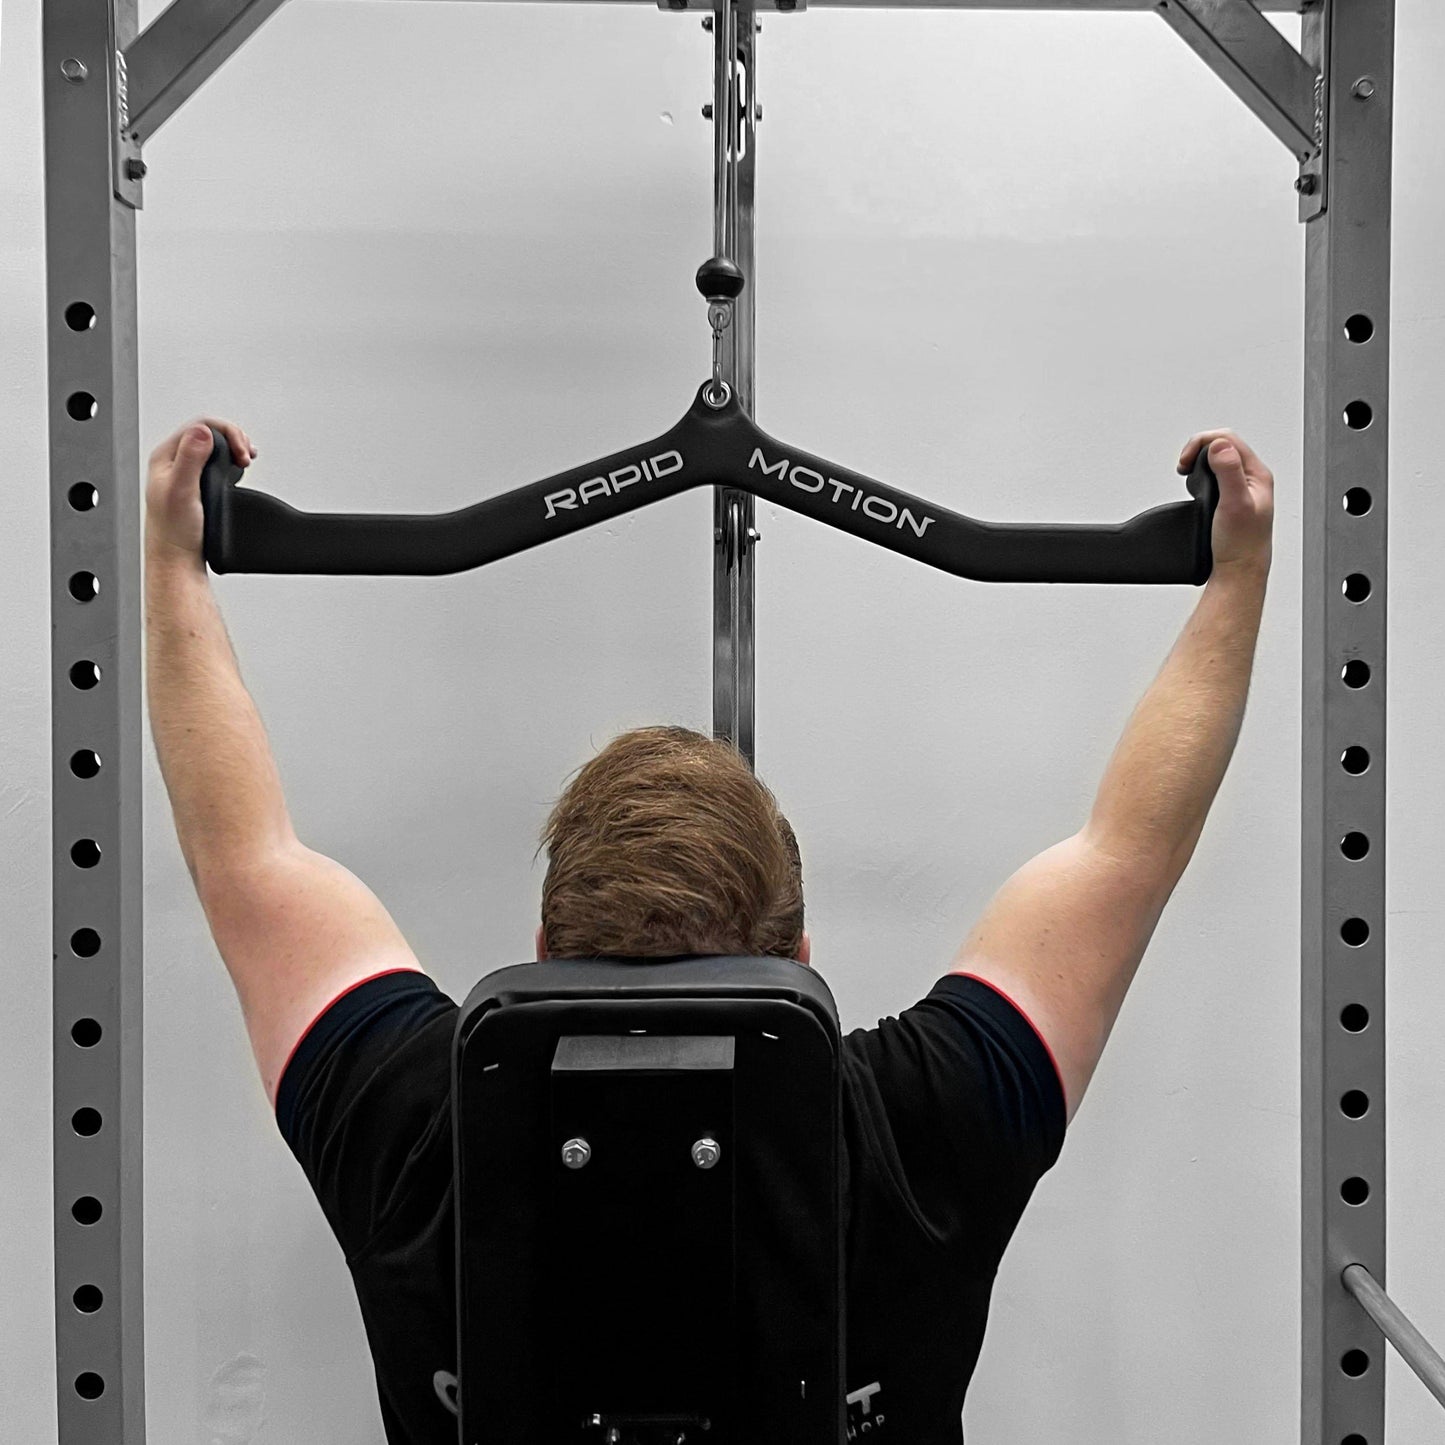 Rapid Motion Power Grip Cable Attachments - Lat Pulldown and Row Pack-Cable Attachments and Accessories-Gym Direct